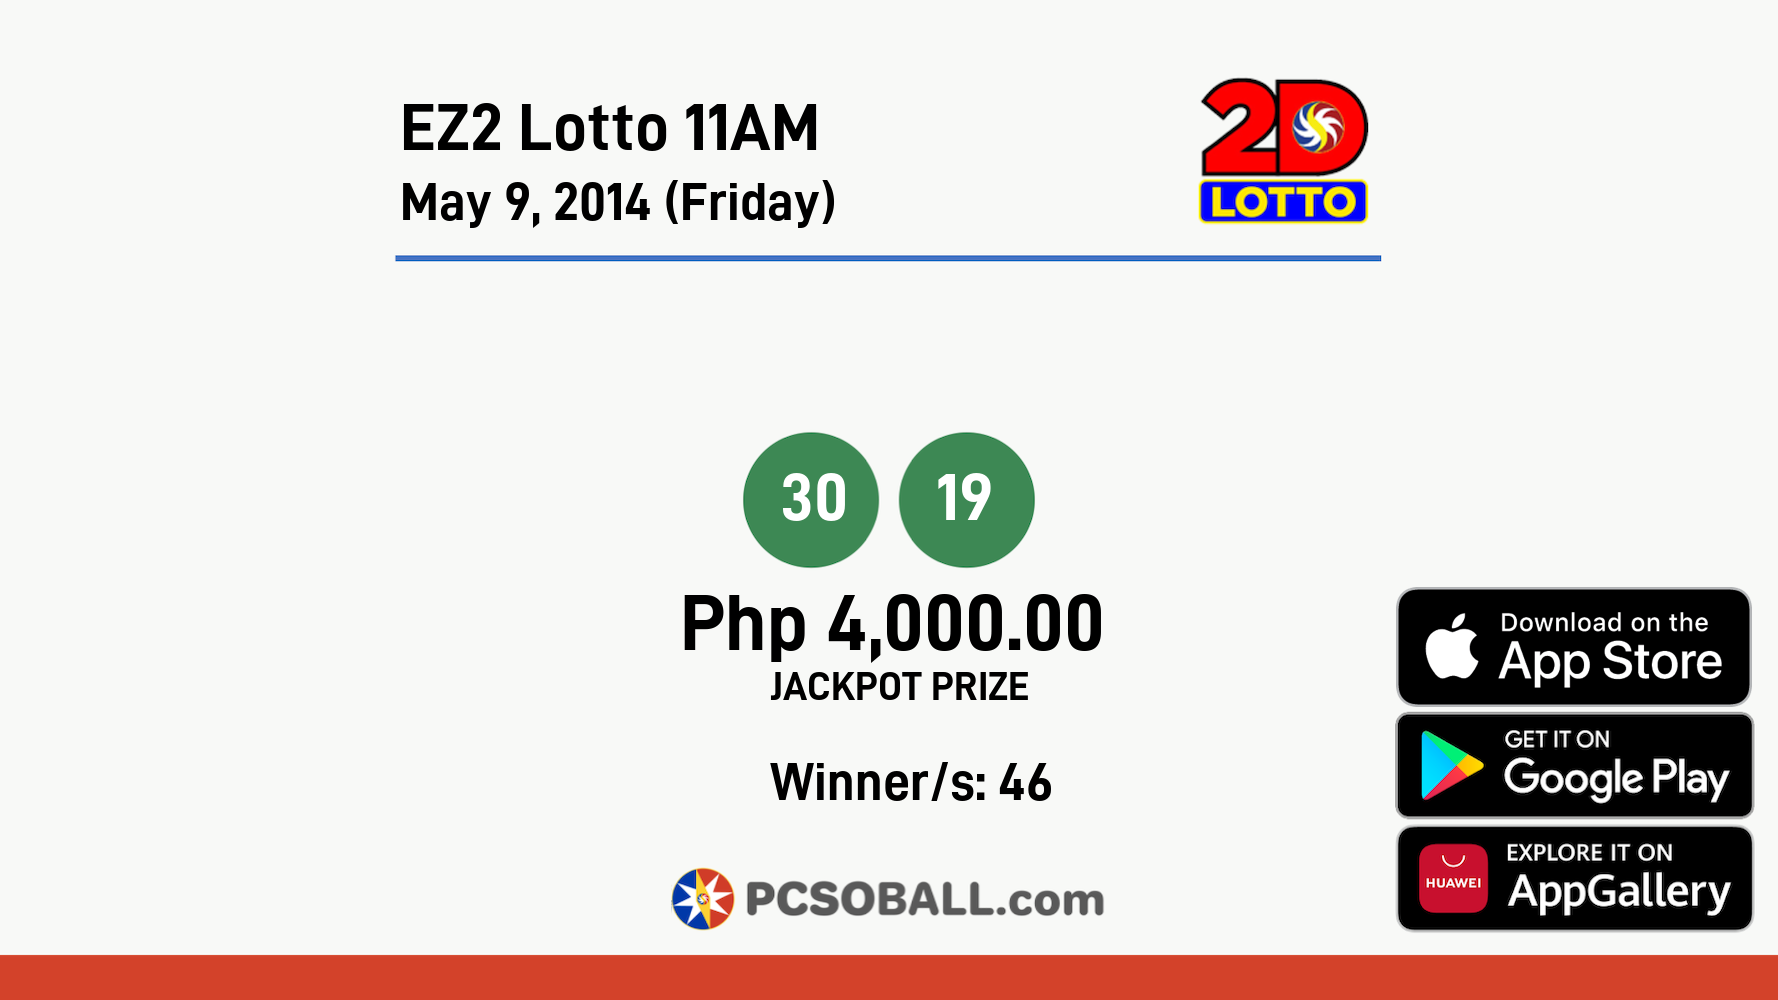 EZ2 Lotto 11AM May 9, 2014 (Friday) Result